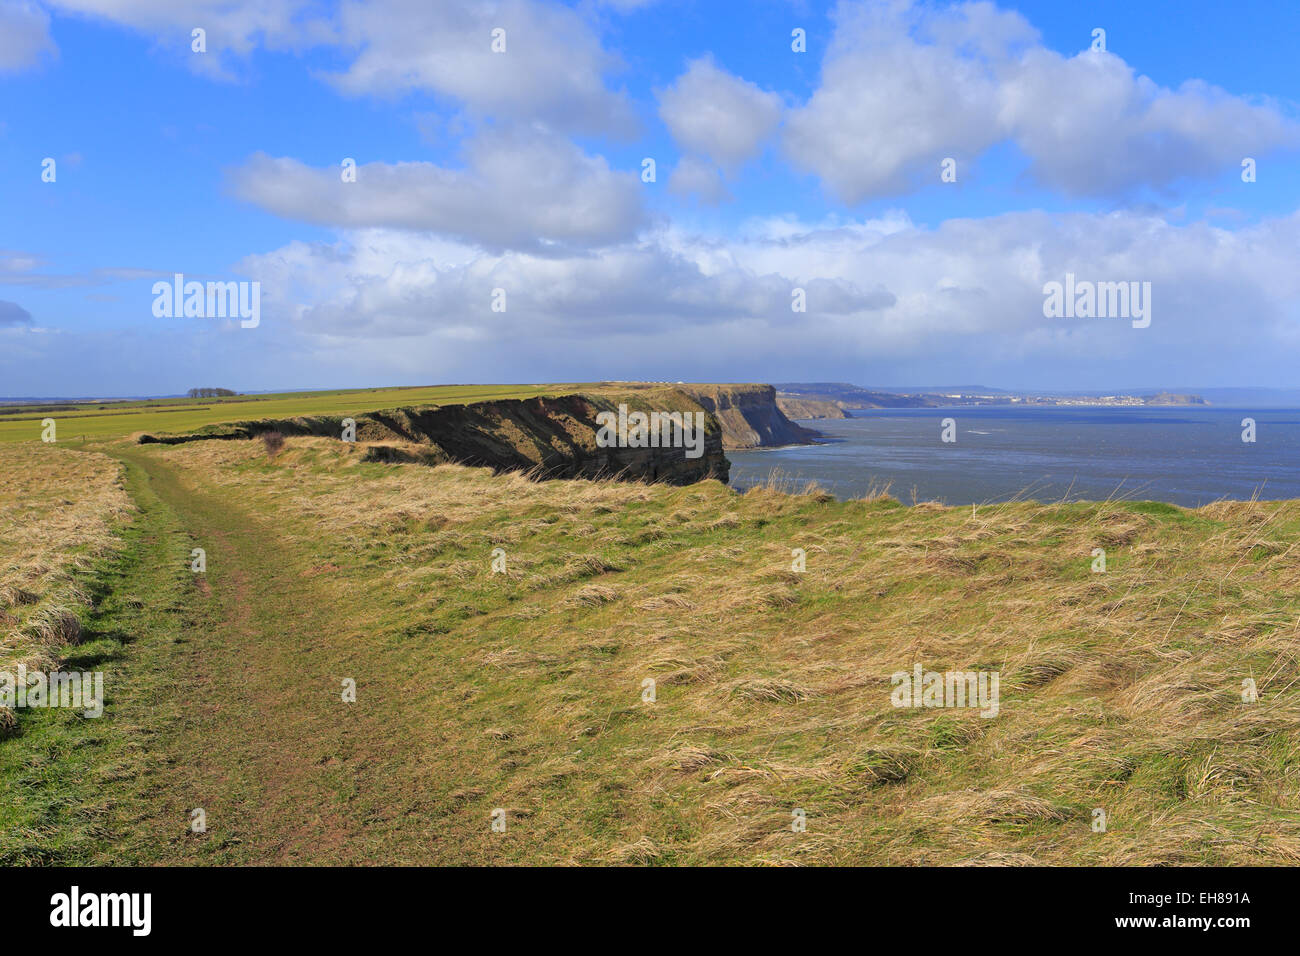 Cleveland Way, sentier national, Filey, North Yorkshire, Angleterre, Royaume-Uni. Banque D'Images